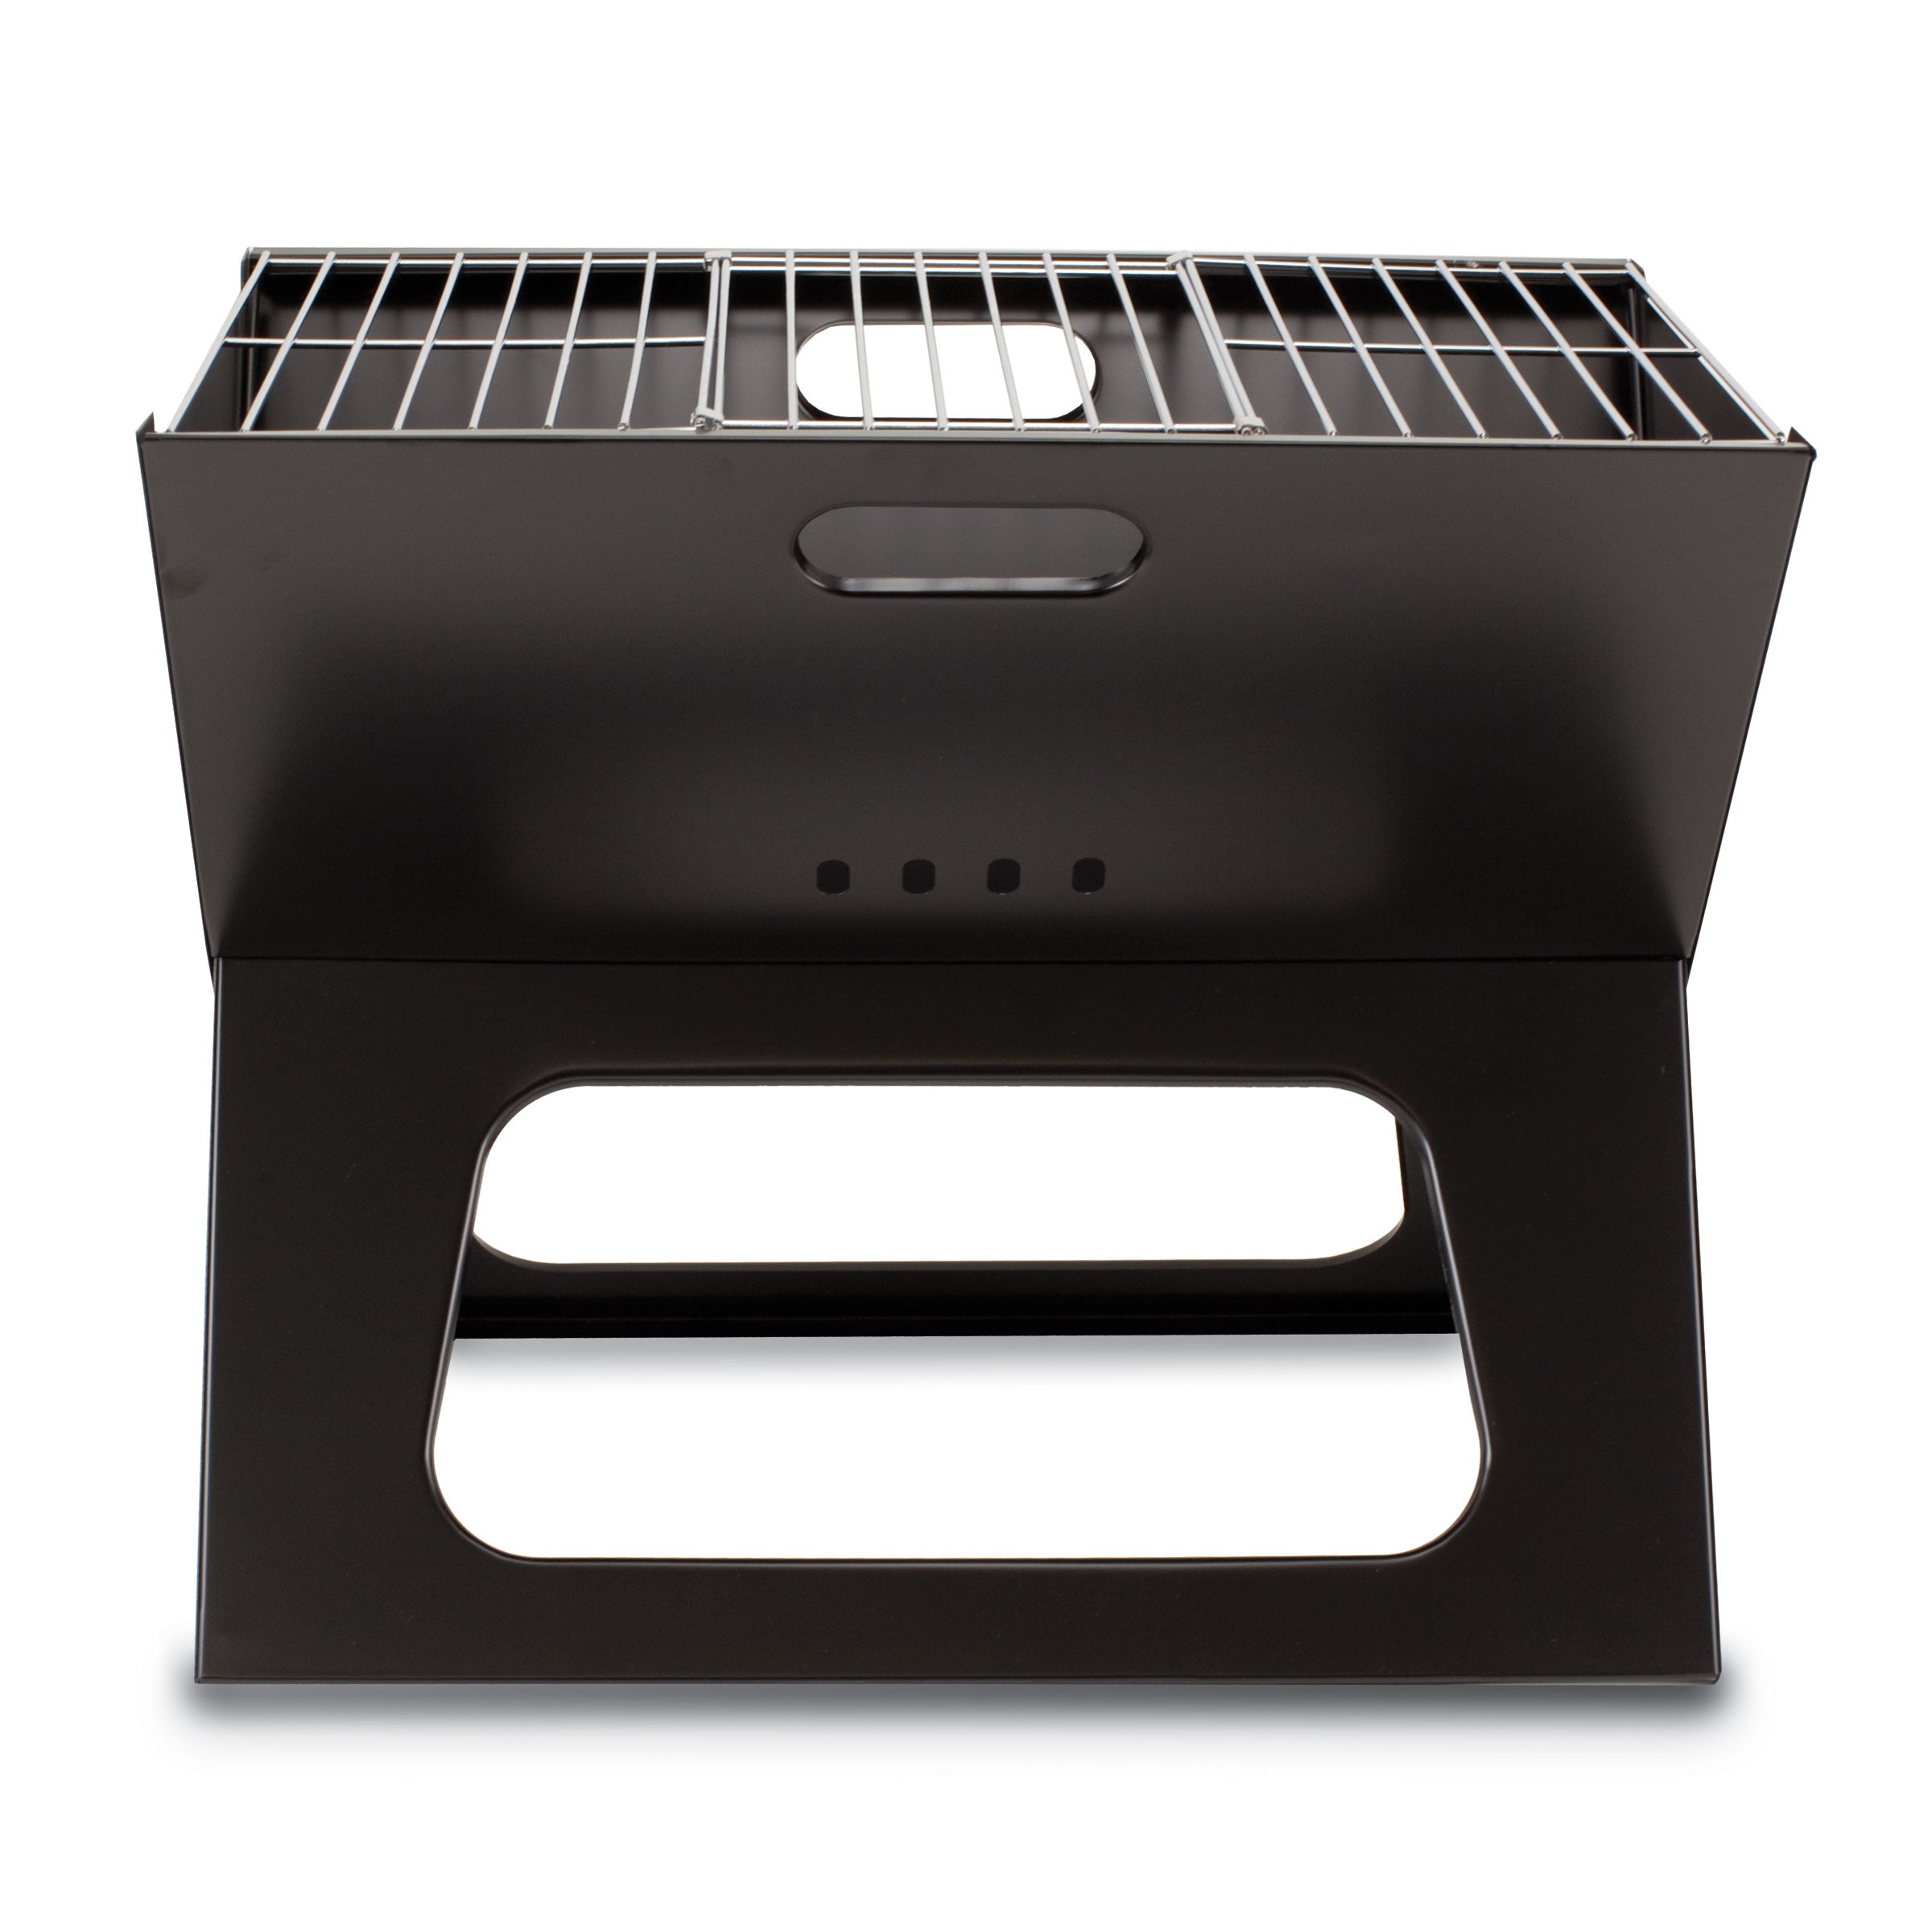 Cal Bears - X-Grill Portable Charcoal BBQ Grill